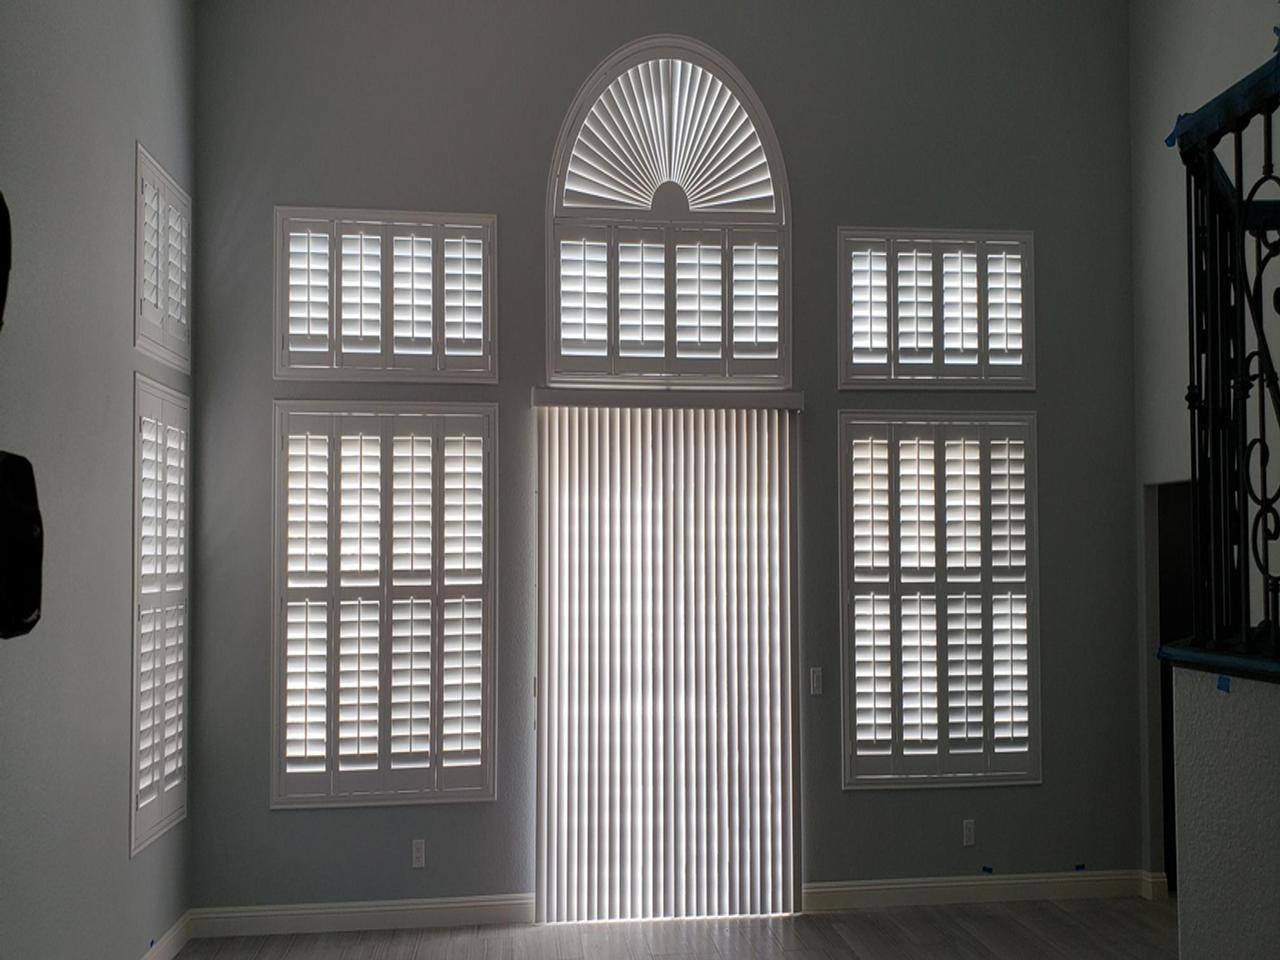 Huge wall of windows with arched windows with shutters